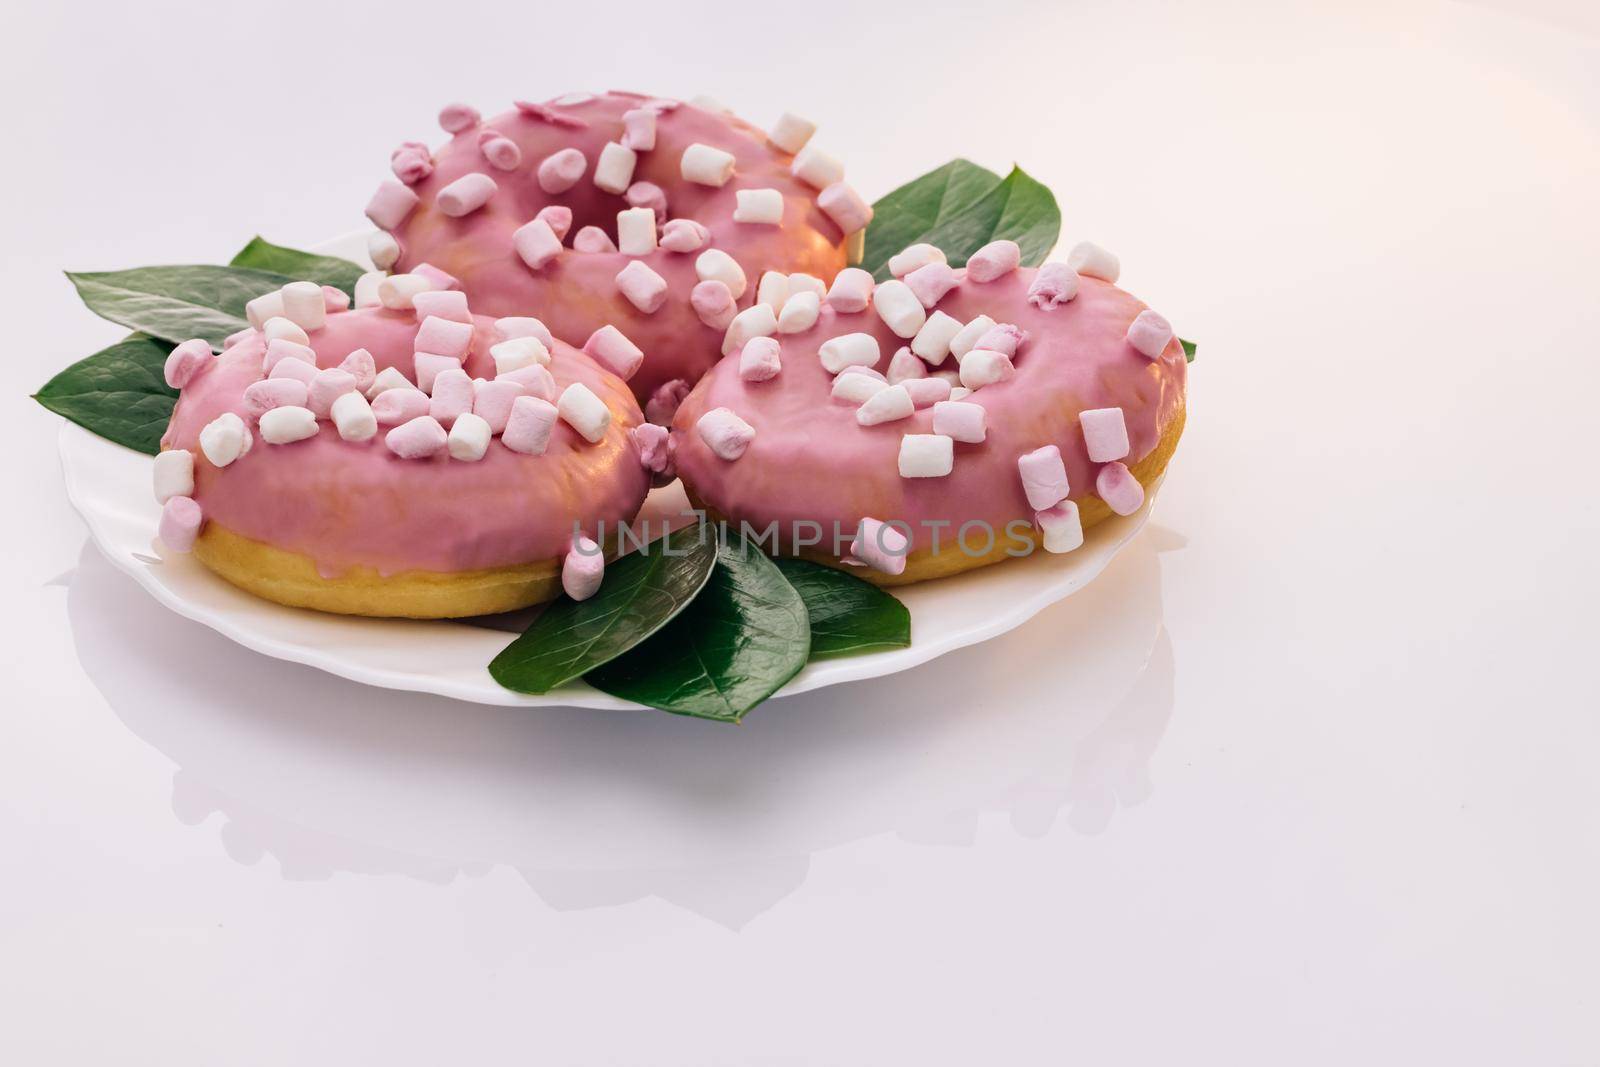 Shot of white tasty delicious sweet donut with colorful sprinkles on white background. Colorful frosted pink doughnut. Assorted donuts. Pink glazed and sprinkles donuts. Dessert by uflypro